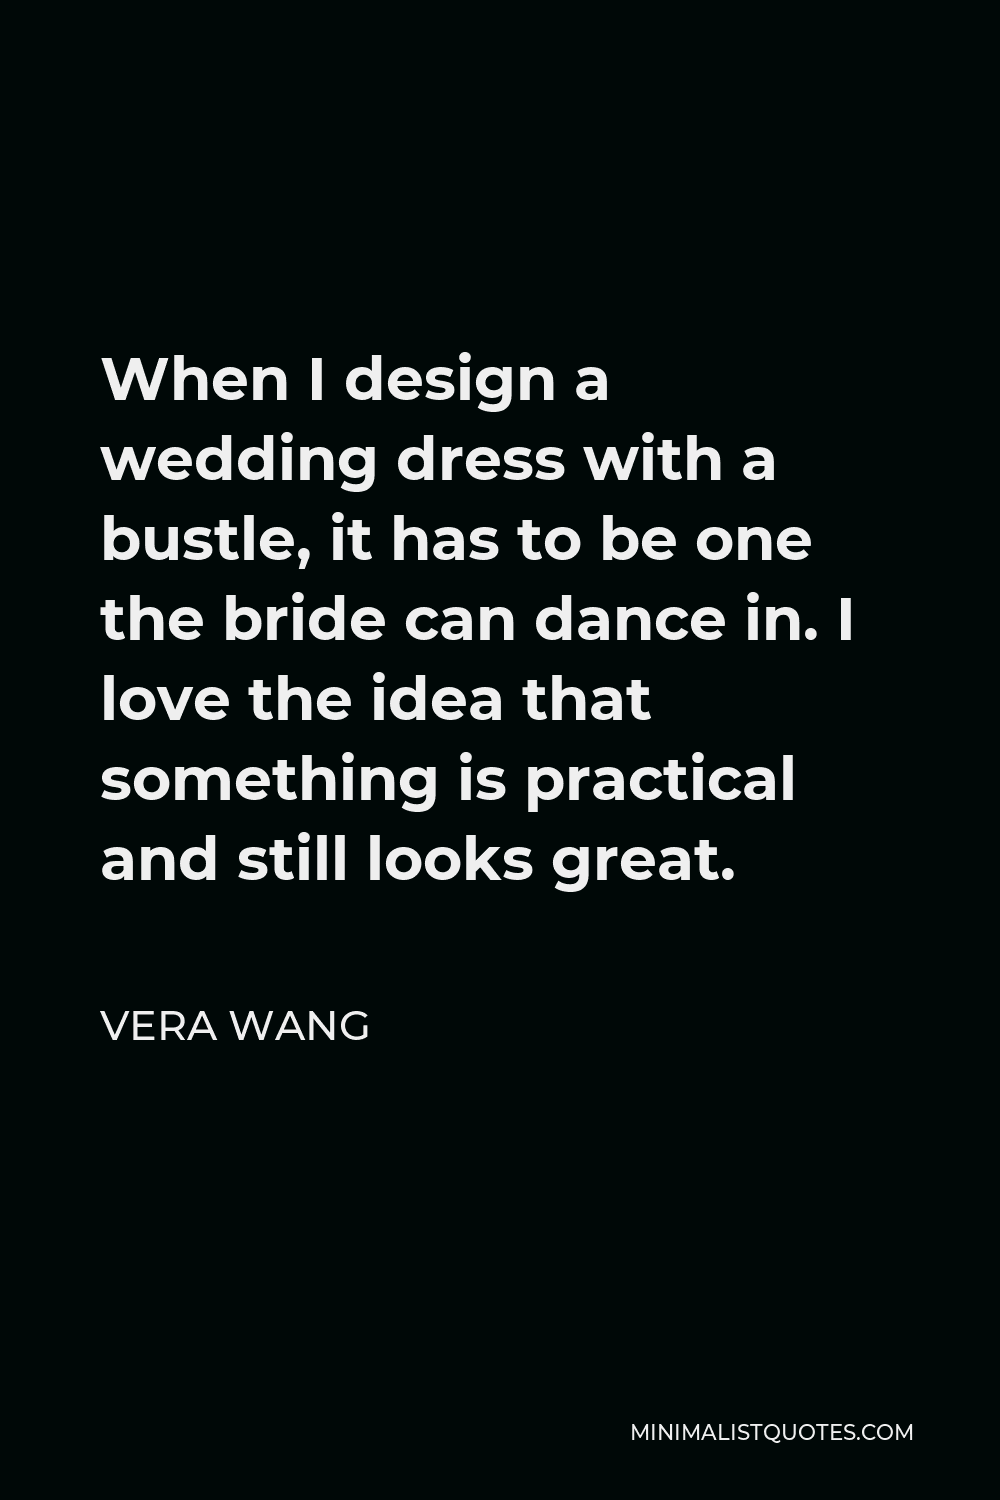 Vera Wang Quote - When I design a wedding dress with a bustle, it has to be one the bride can dance in. I love the idea that something is practical and still looks great.